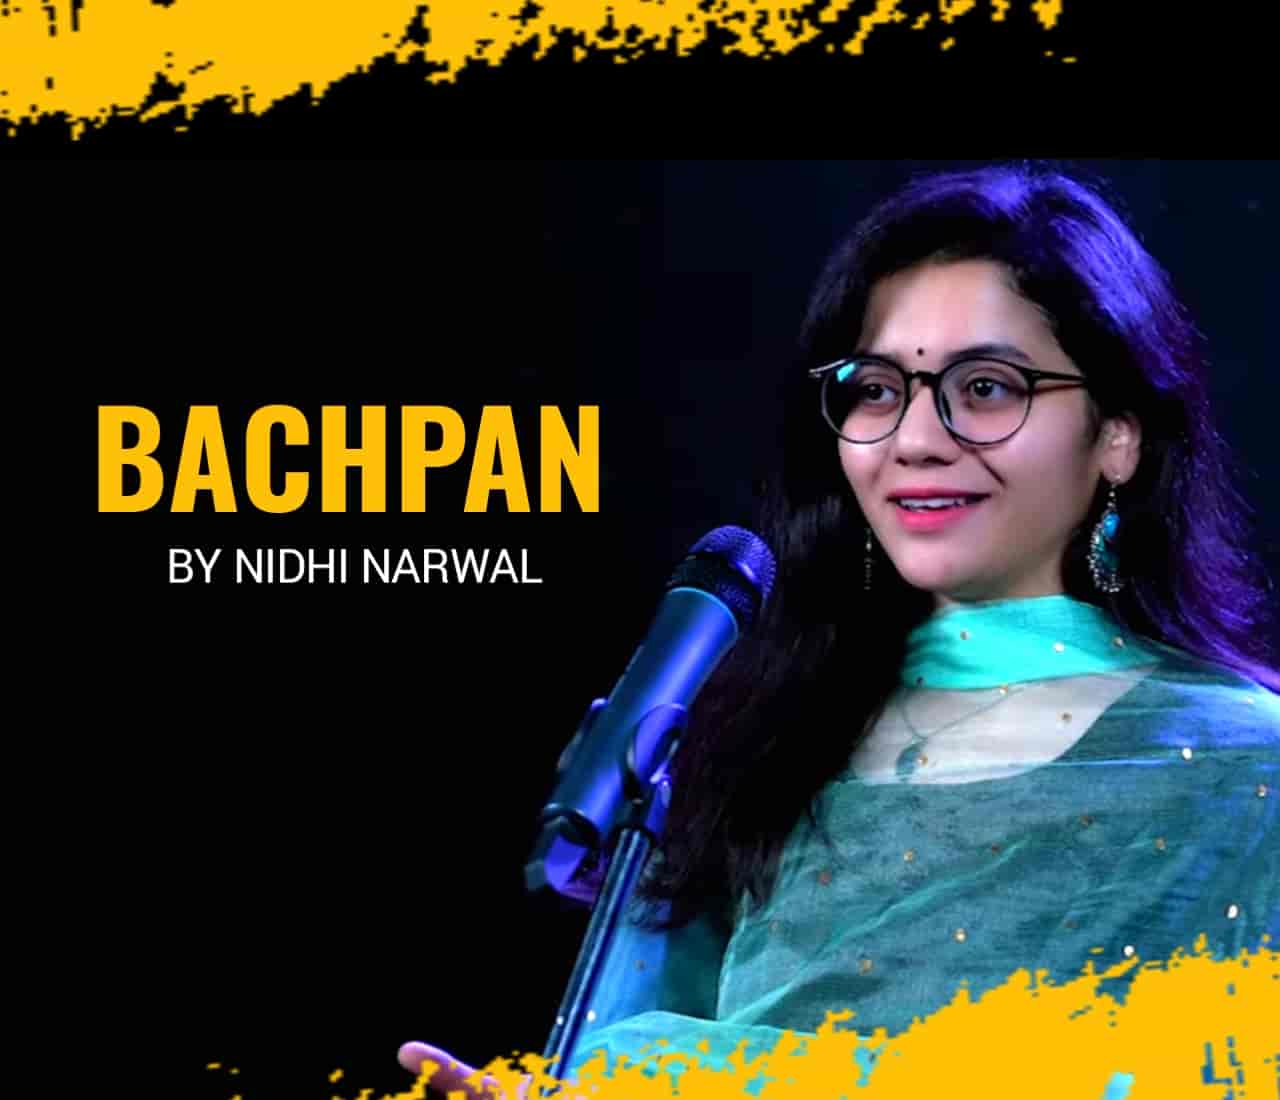 Nidhi Narwal has performed and written this beautiful poetry. This beautiful poetry 'Bachpan has released under the label of FNG Media.